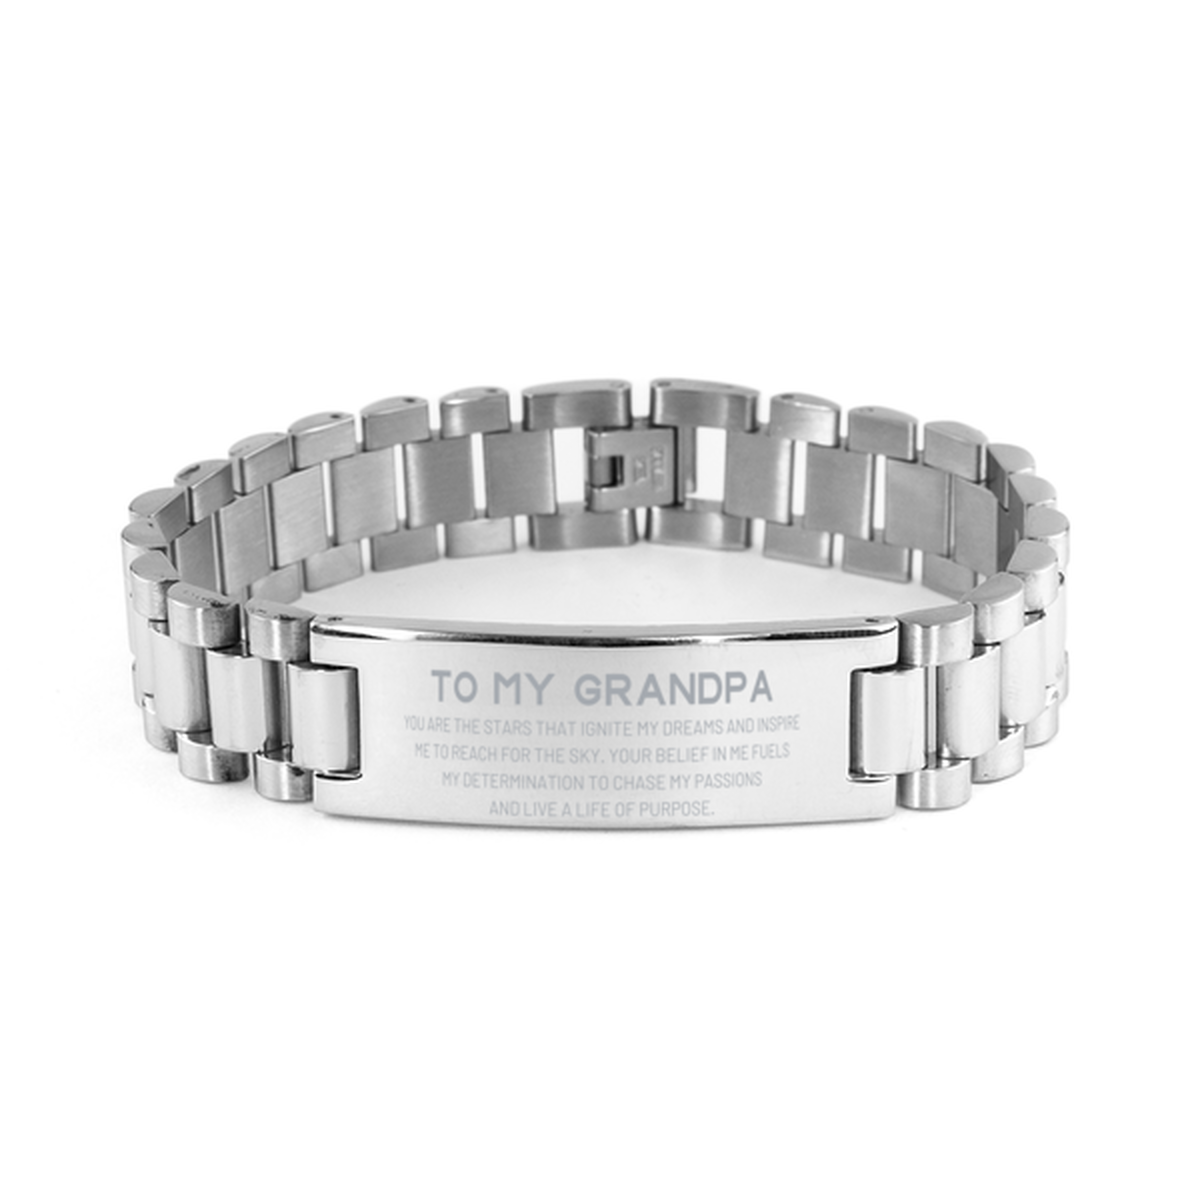 To My Grandpa Ladder Stainless Steel Bracelet, You are the stars that ignite my dreams and inspire me to reach for the sky, Birthday Unique Gifts For Grandpa, Thank You Gifts For Grandpa